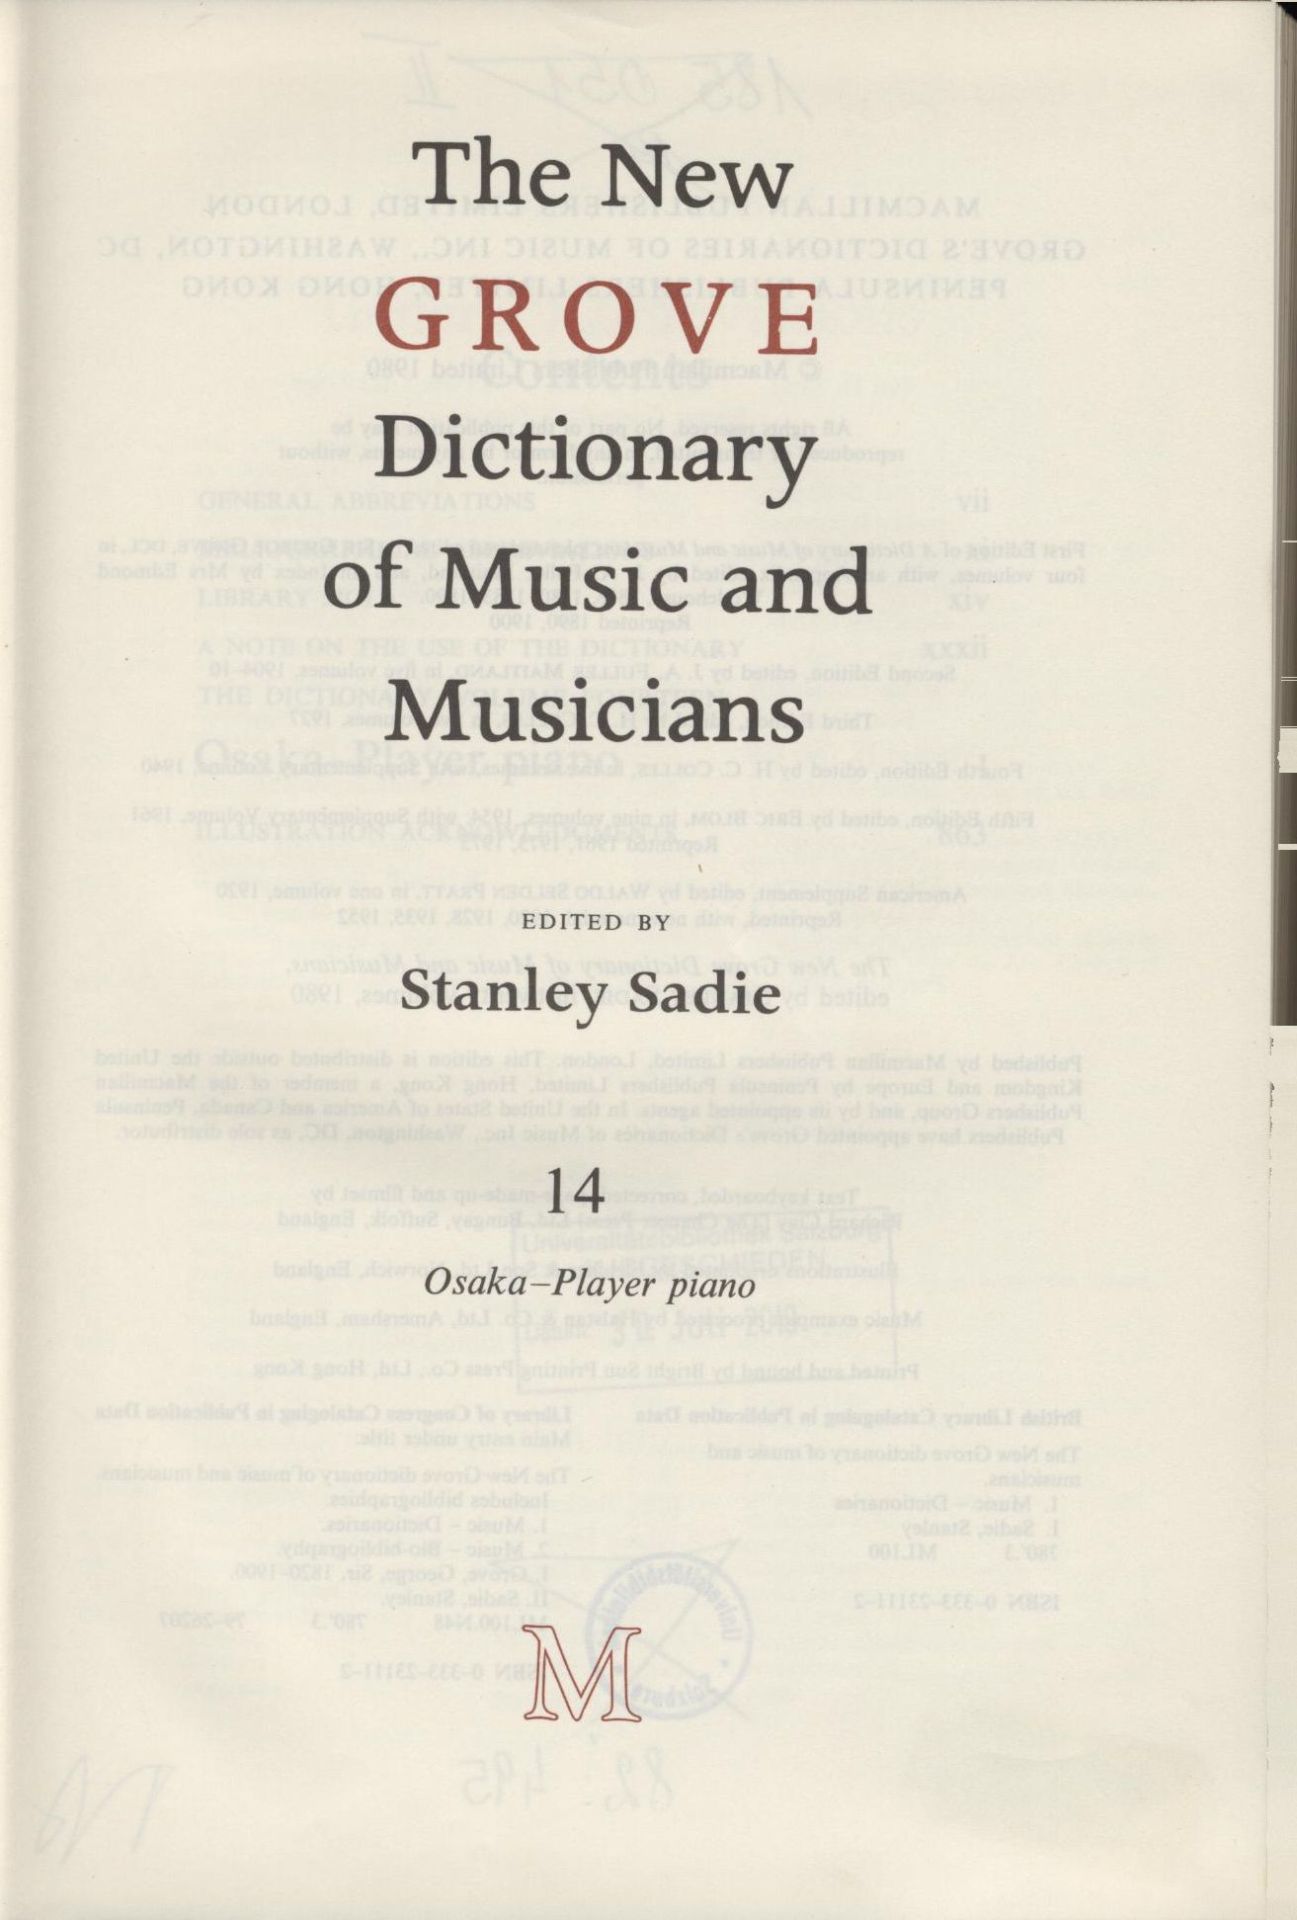 The new Grove Dictionary of Music and Musicians 14 Osaka - Player piano - Sadie, Stanley